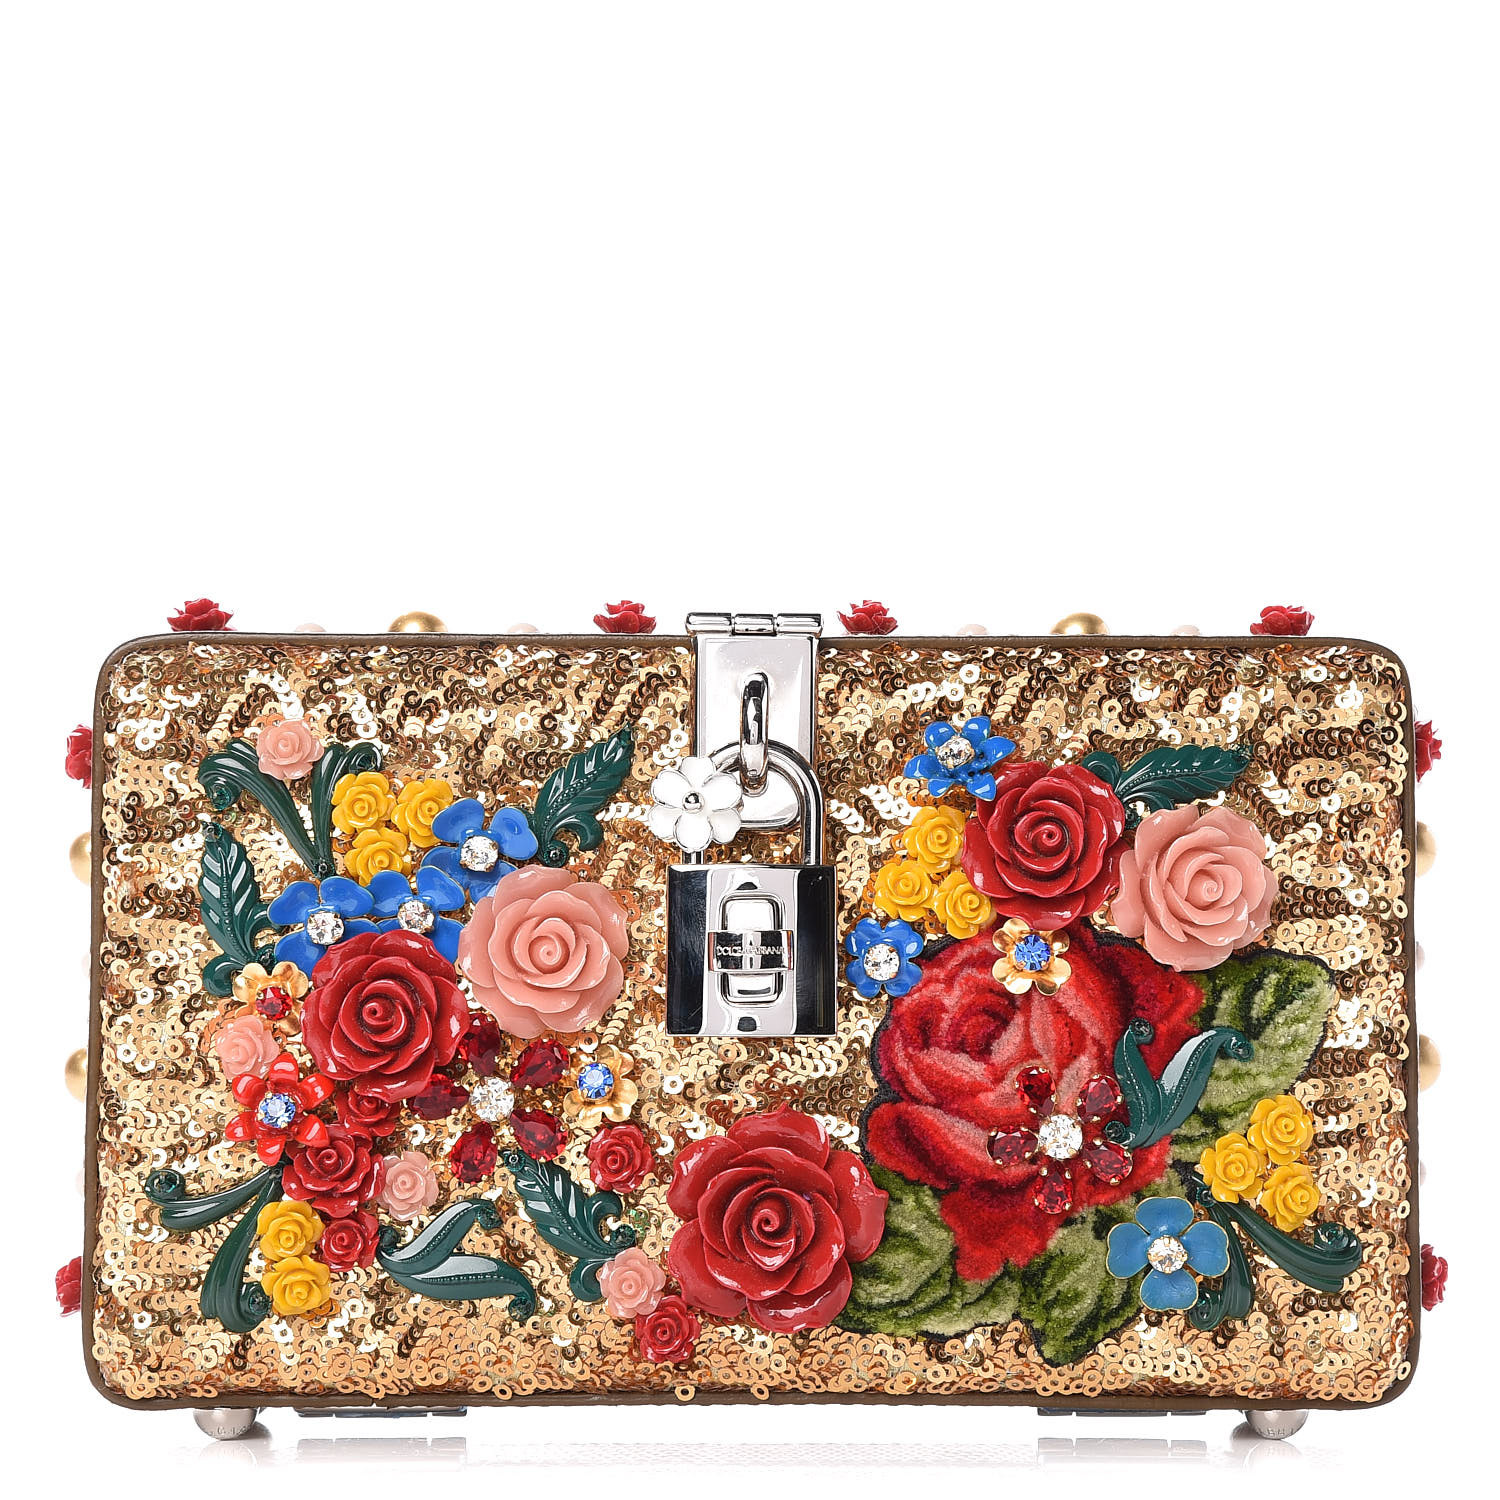 DOLCE & GABBANA Sequin Floral Dolce Box Clutch Gold 409372